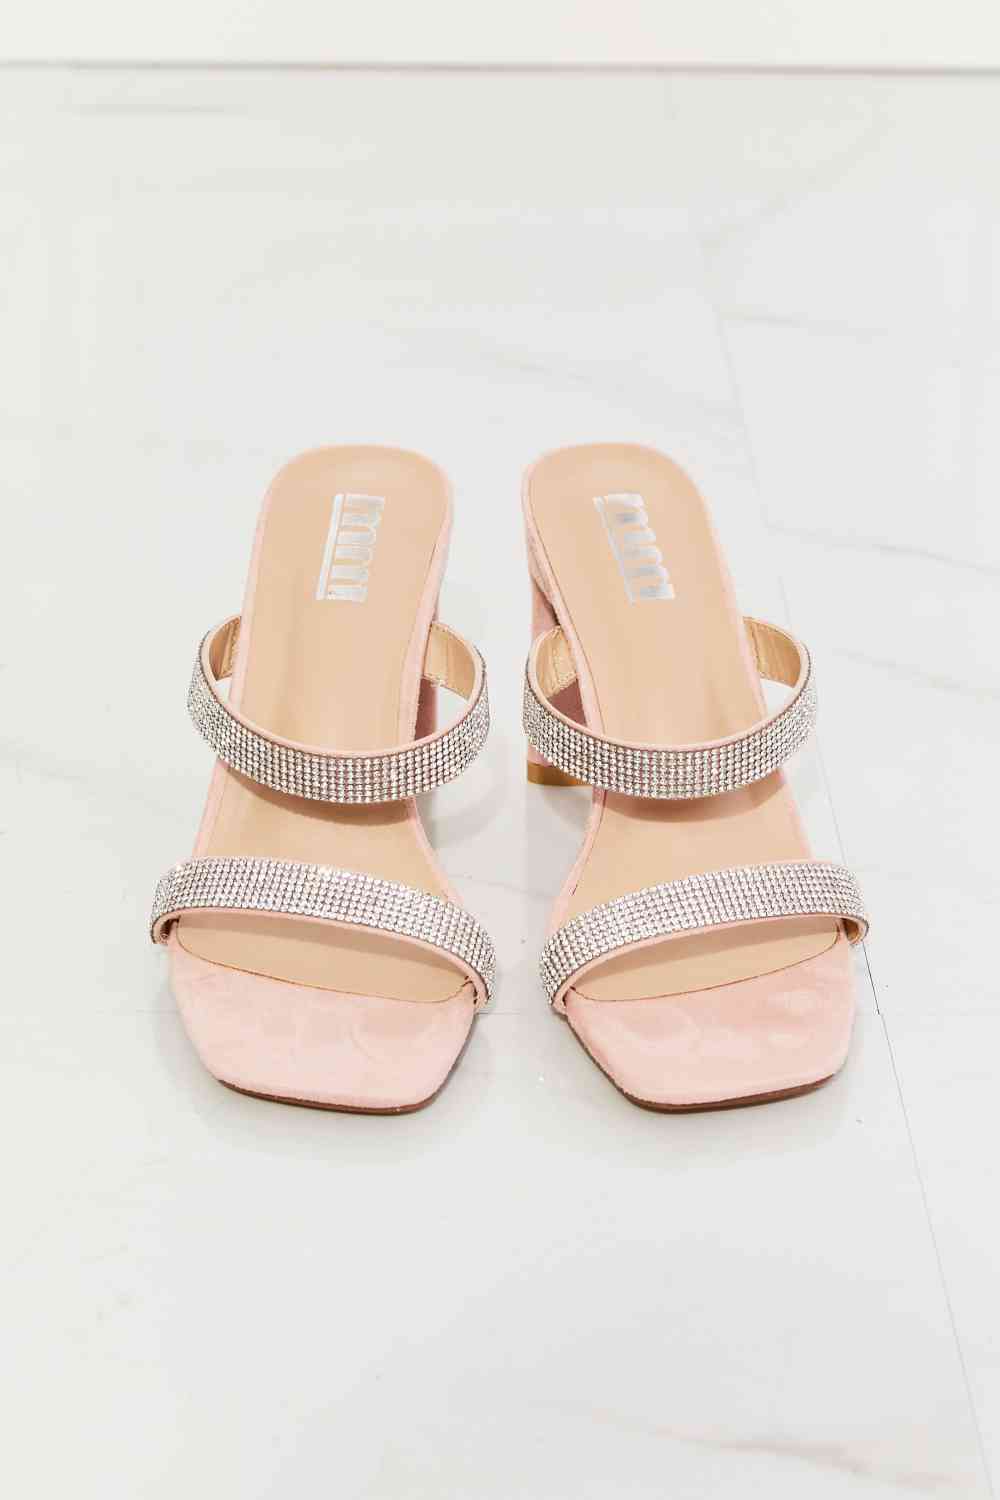 Leave A Little Sparkle Rhinestone Block Heel Sandal in Pink - Accessories - Shoes - 4 - 2024